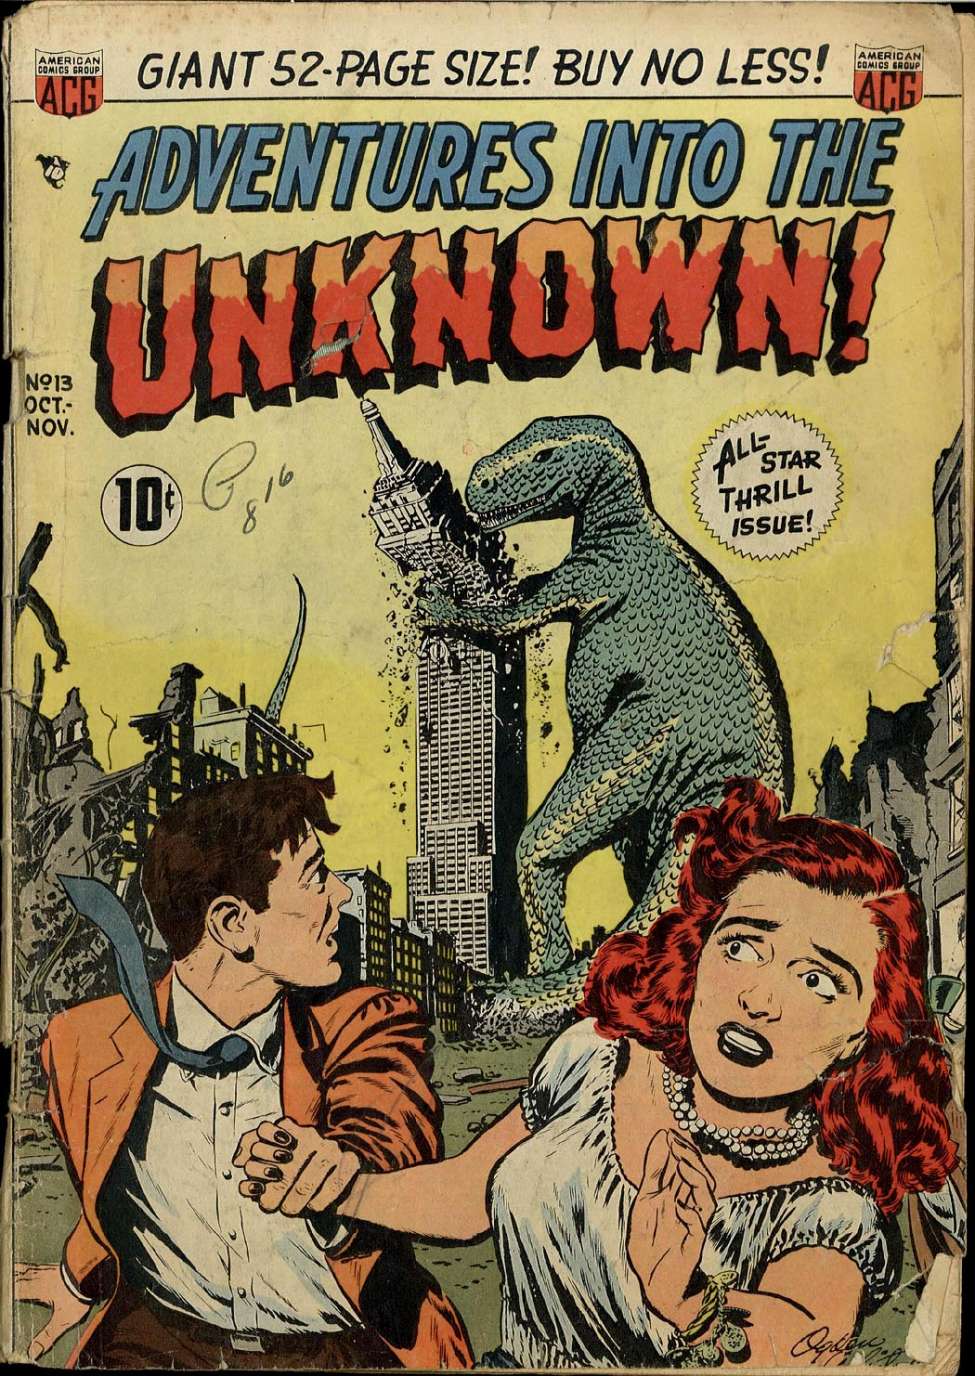 72 eBooks on CD 1948-1956 Adventures into the Unknown Comics Book Package